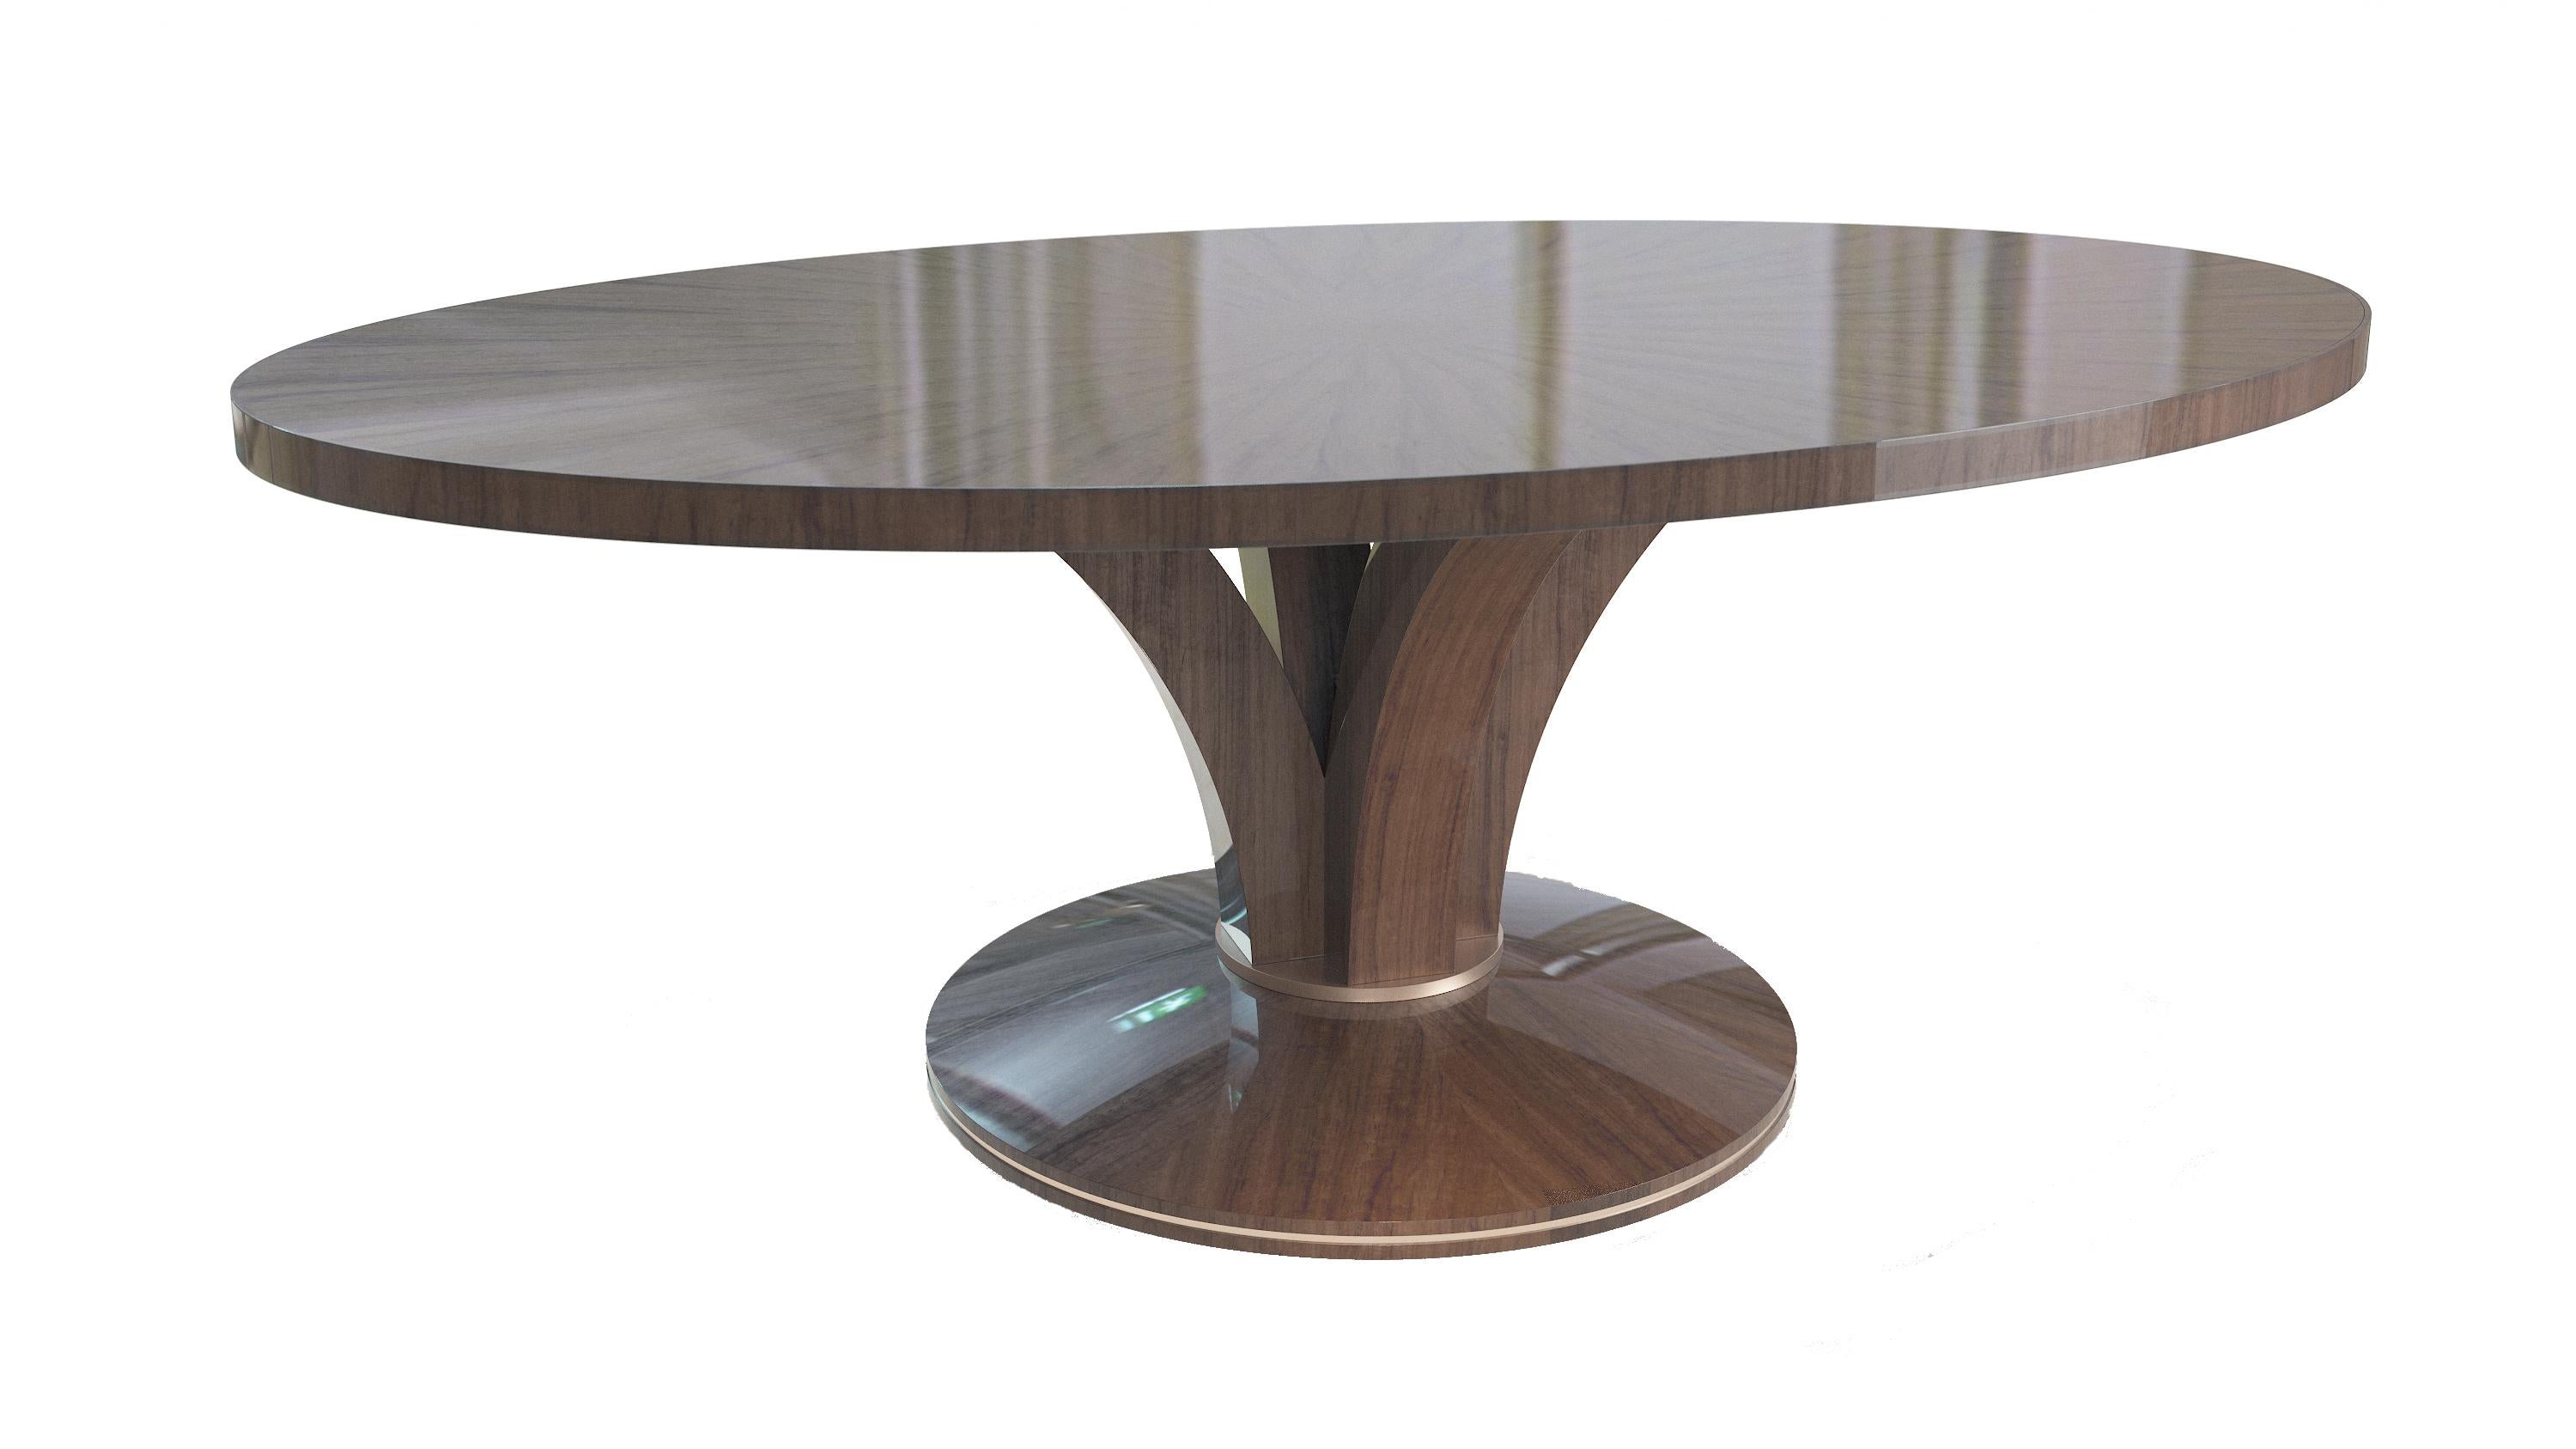 A favourite from our dining table collection finished in sycamore slate grey with a gleaming polished nickel collar.

This elegant dining table oozes understated luxury and looks fabulous in any smart dining room with its chic curves and high gloss